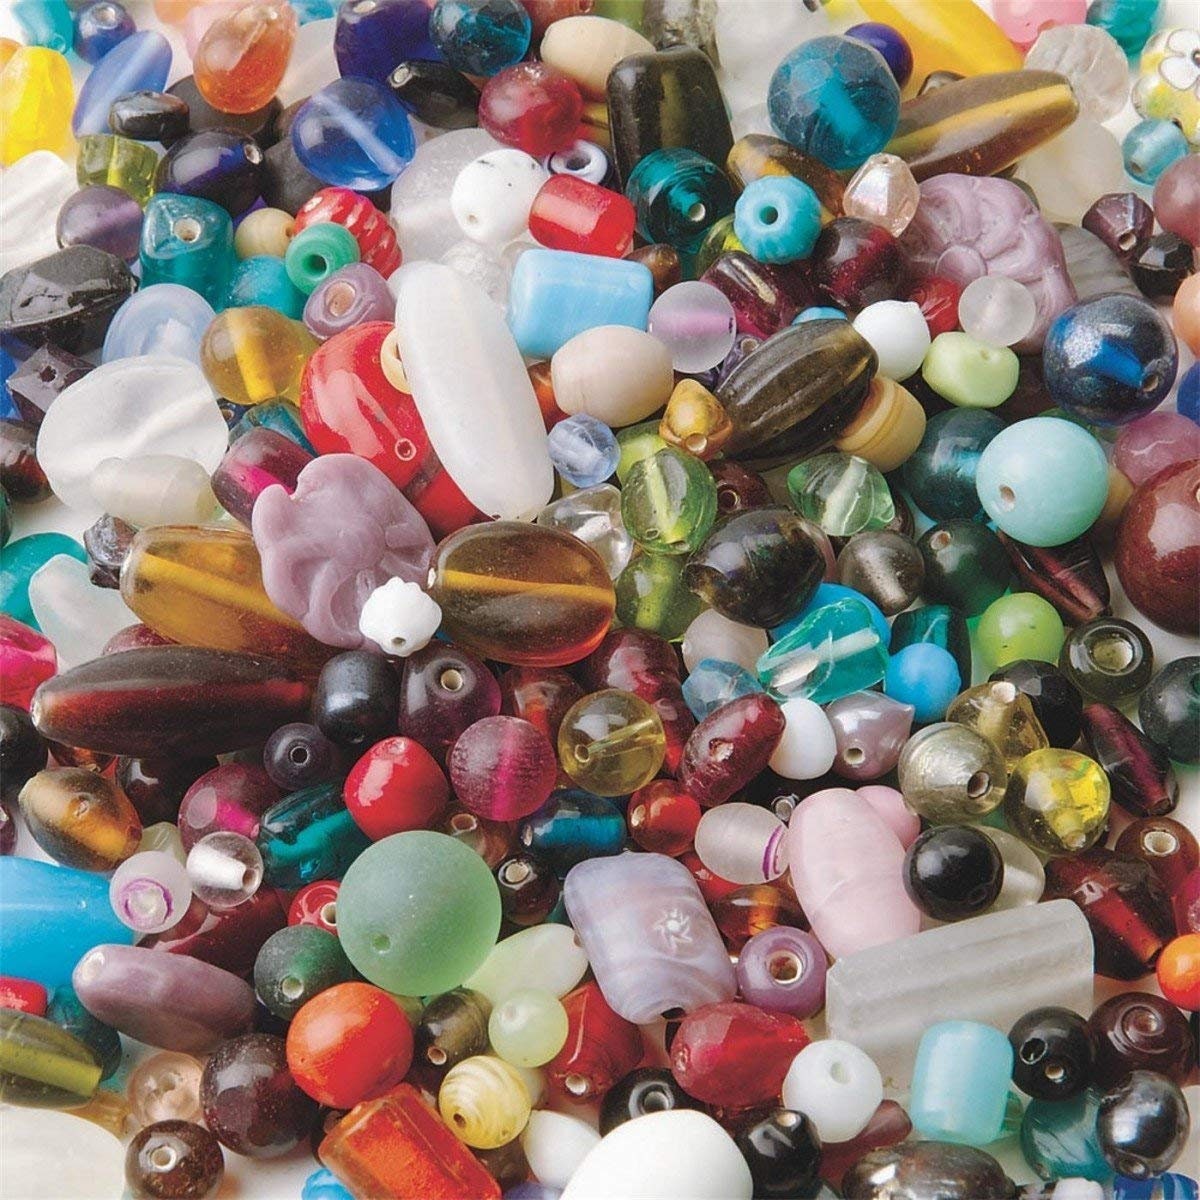 FALL COLORS----- Assorted Glass Beads for Jewelry Making, DIY Work,  Arts and Crafts, Decorative Hobby Artistry, Colorful Crystal Assortment  Bulk